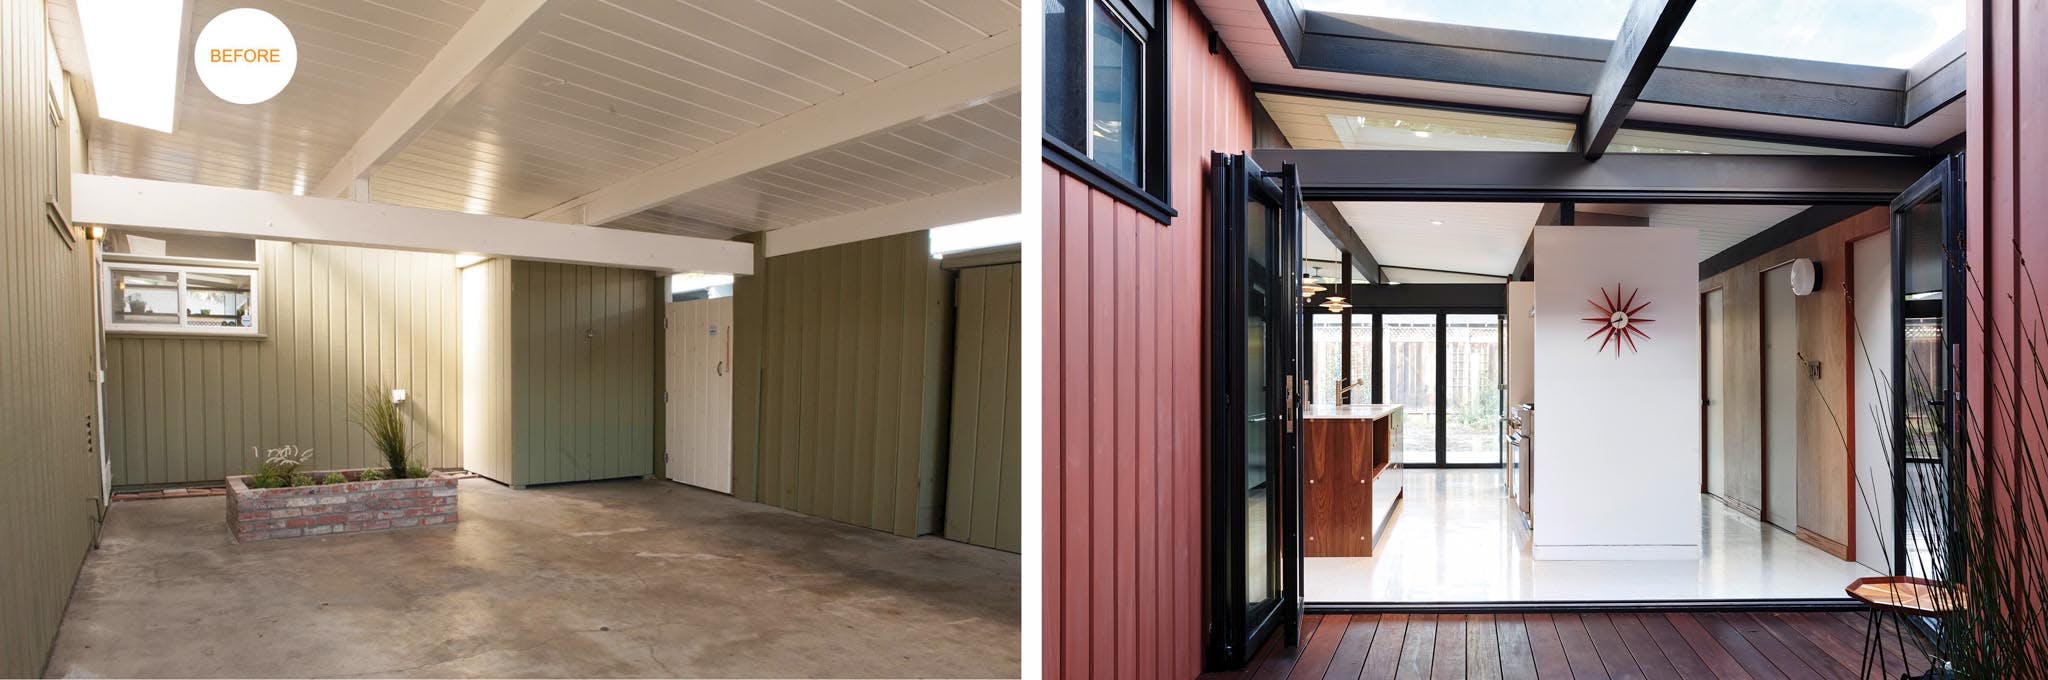 Eichler homes carport before and after remodel with folding glass wall SL60